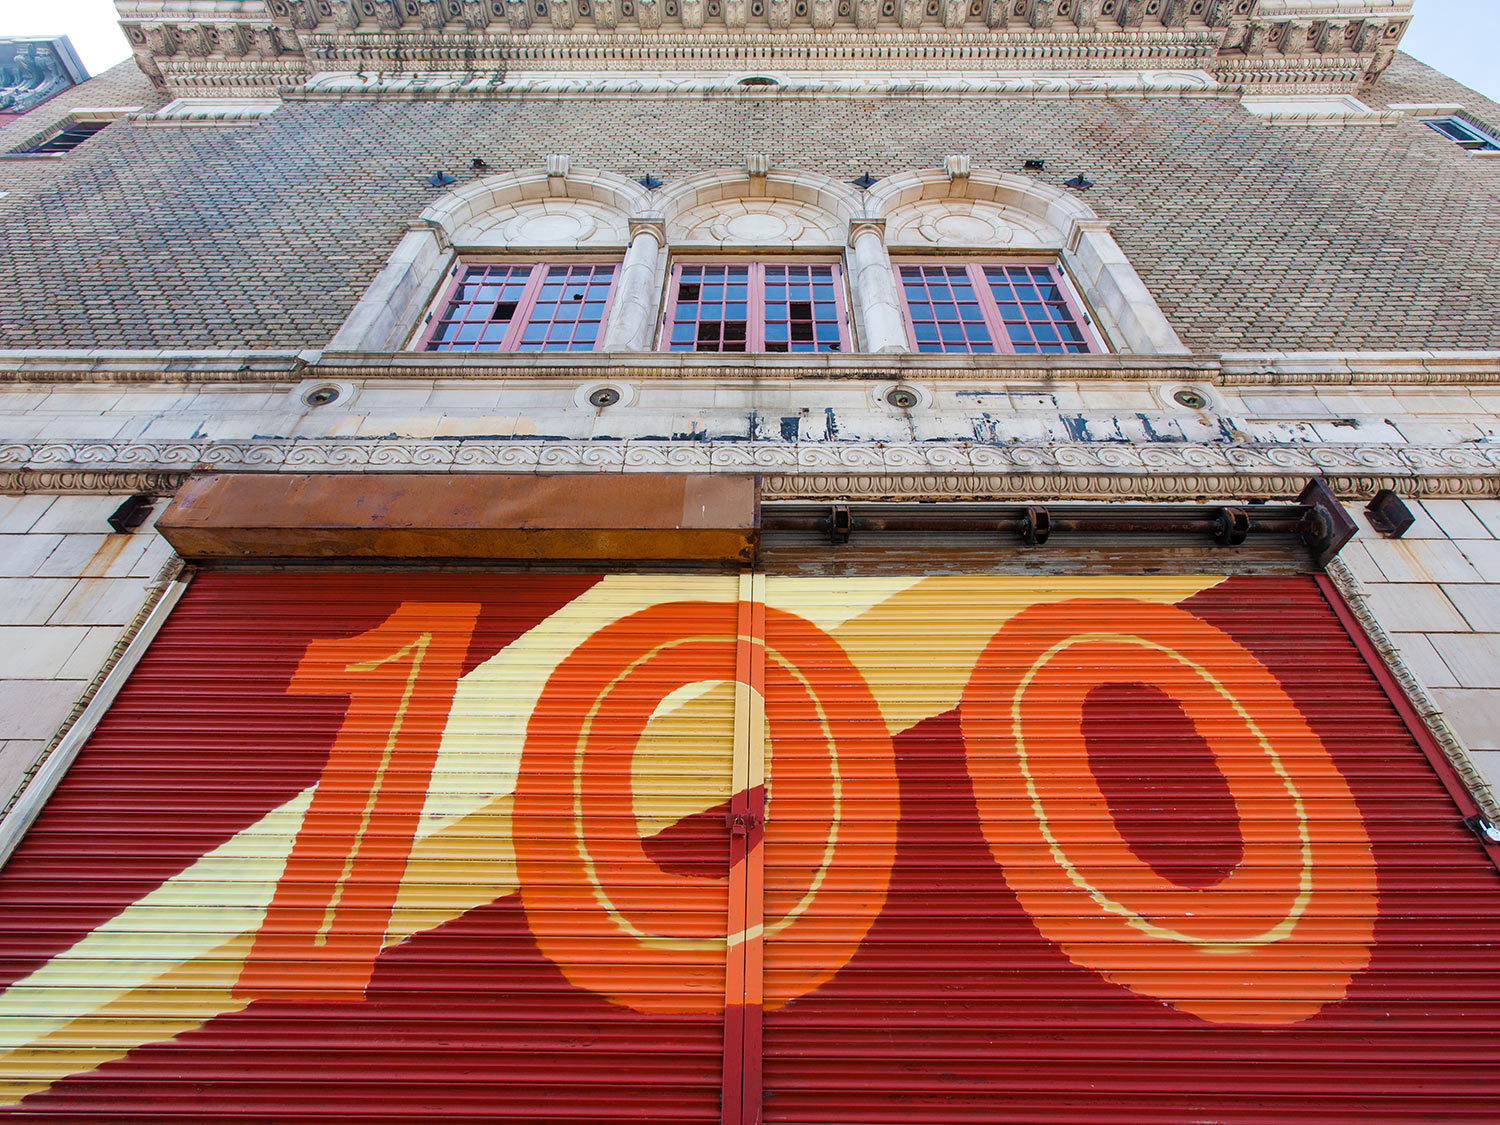 Giant 100 hand-painted mural on the Parkway Theatre in Baltimore to celebrate the building's centennial before renovation by the Maryland Film Festival